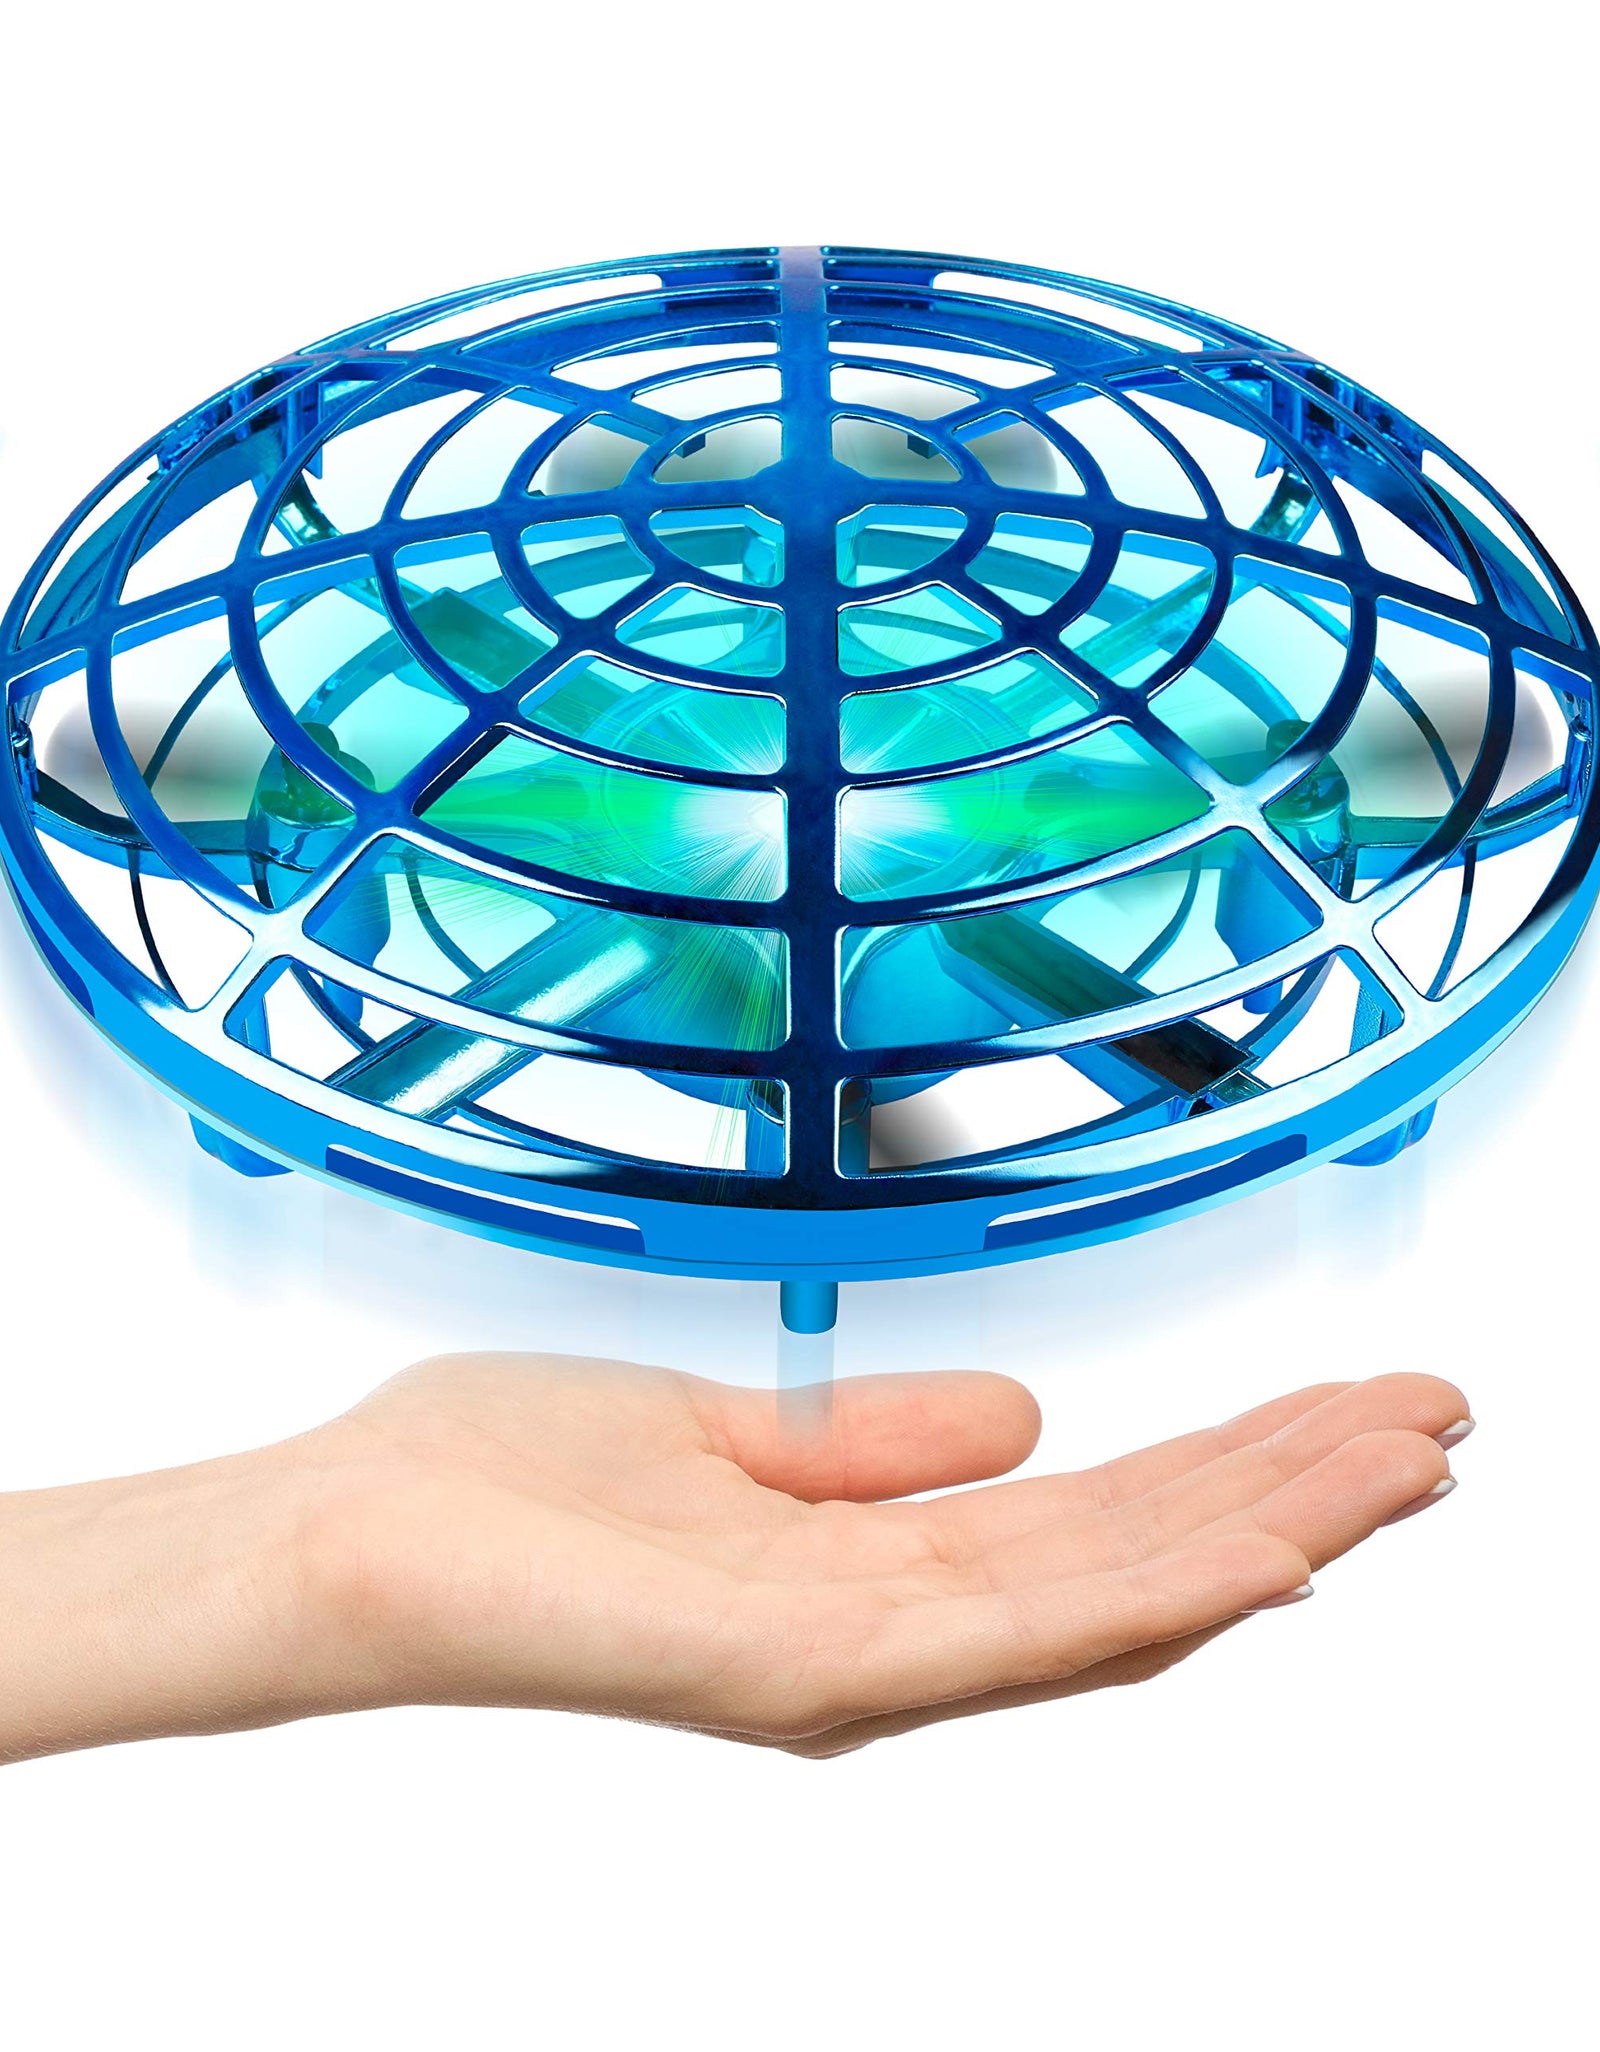 Hand Operated Drones for Kids or Adult - Interactive Infrared Induction Indoor Helicopter Ball with 360° Rotating and Shinning LED Lights,Hand-Controlled Flying Ball Toys for 5 6 7 8 9 10 11 12 Years